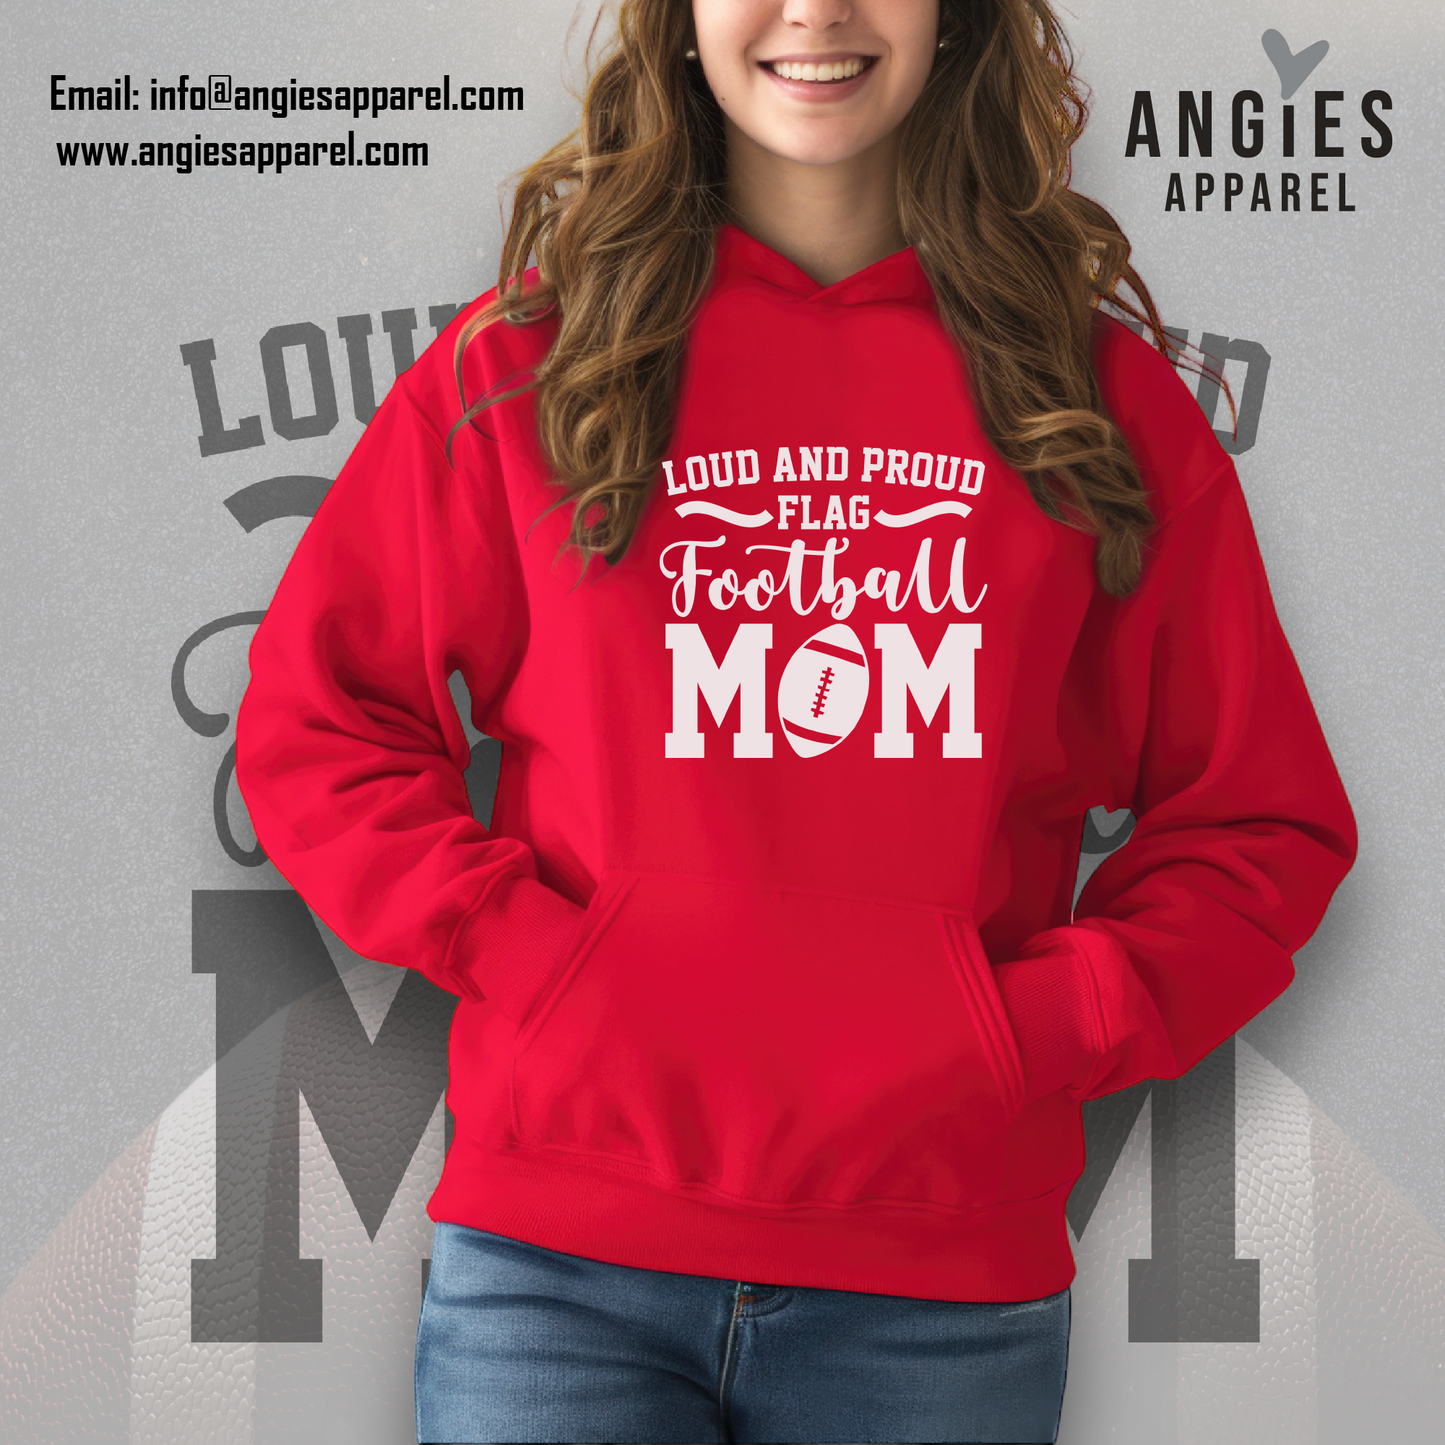 5. Loud and Proud Football Mom